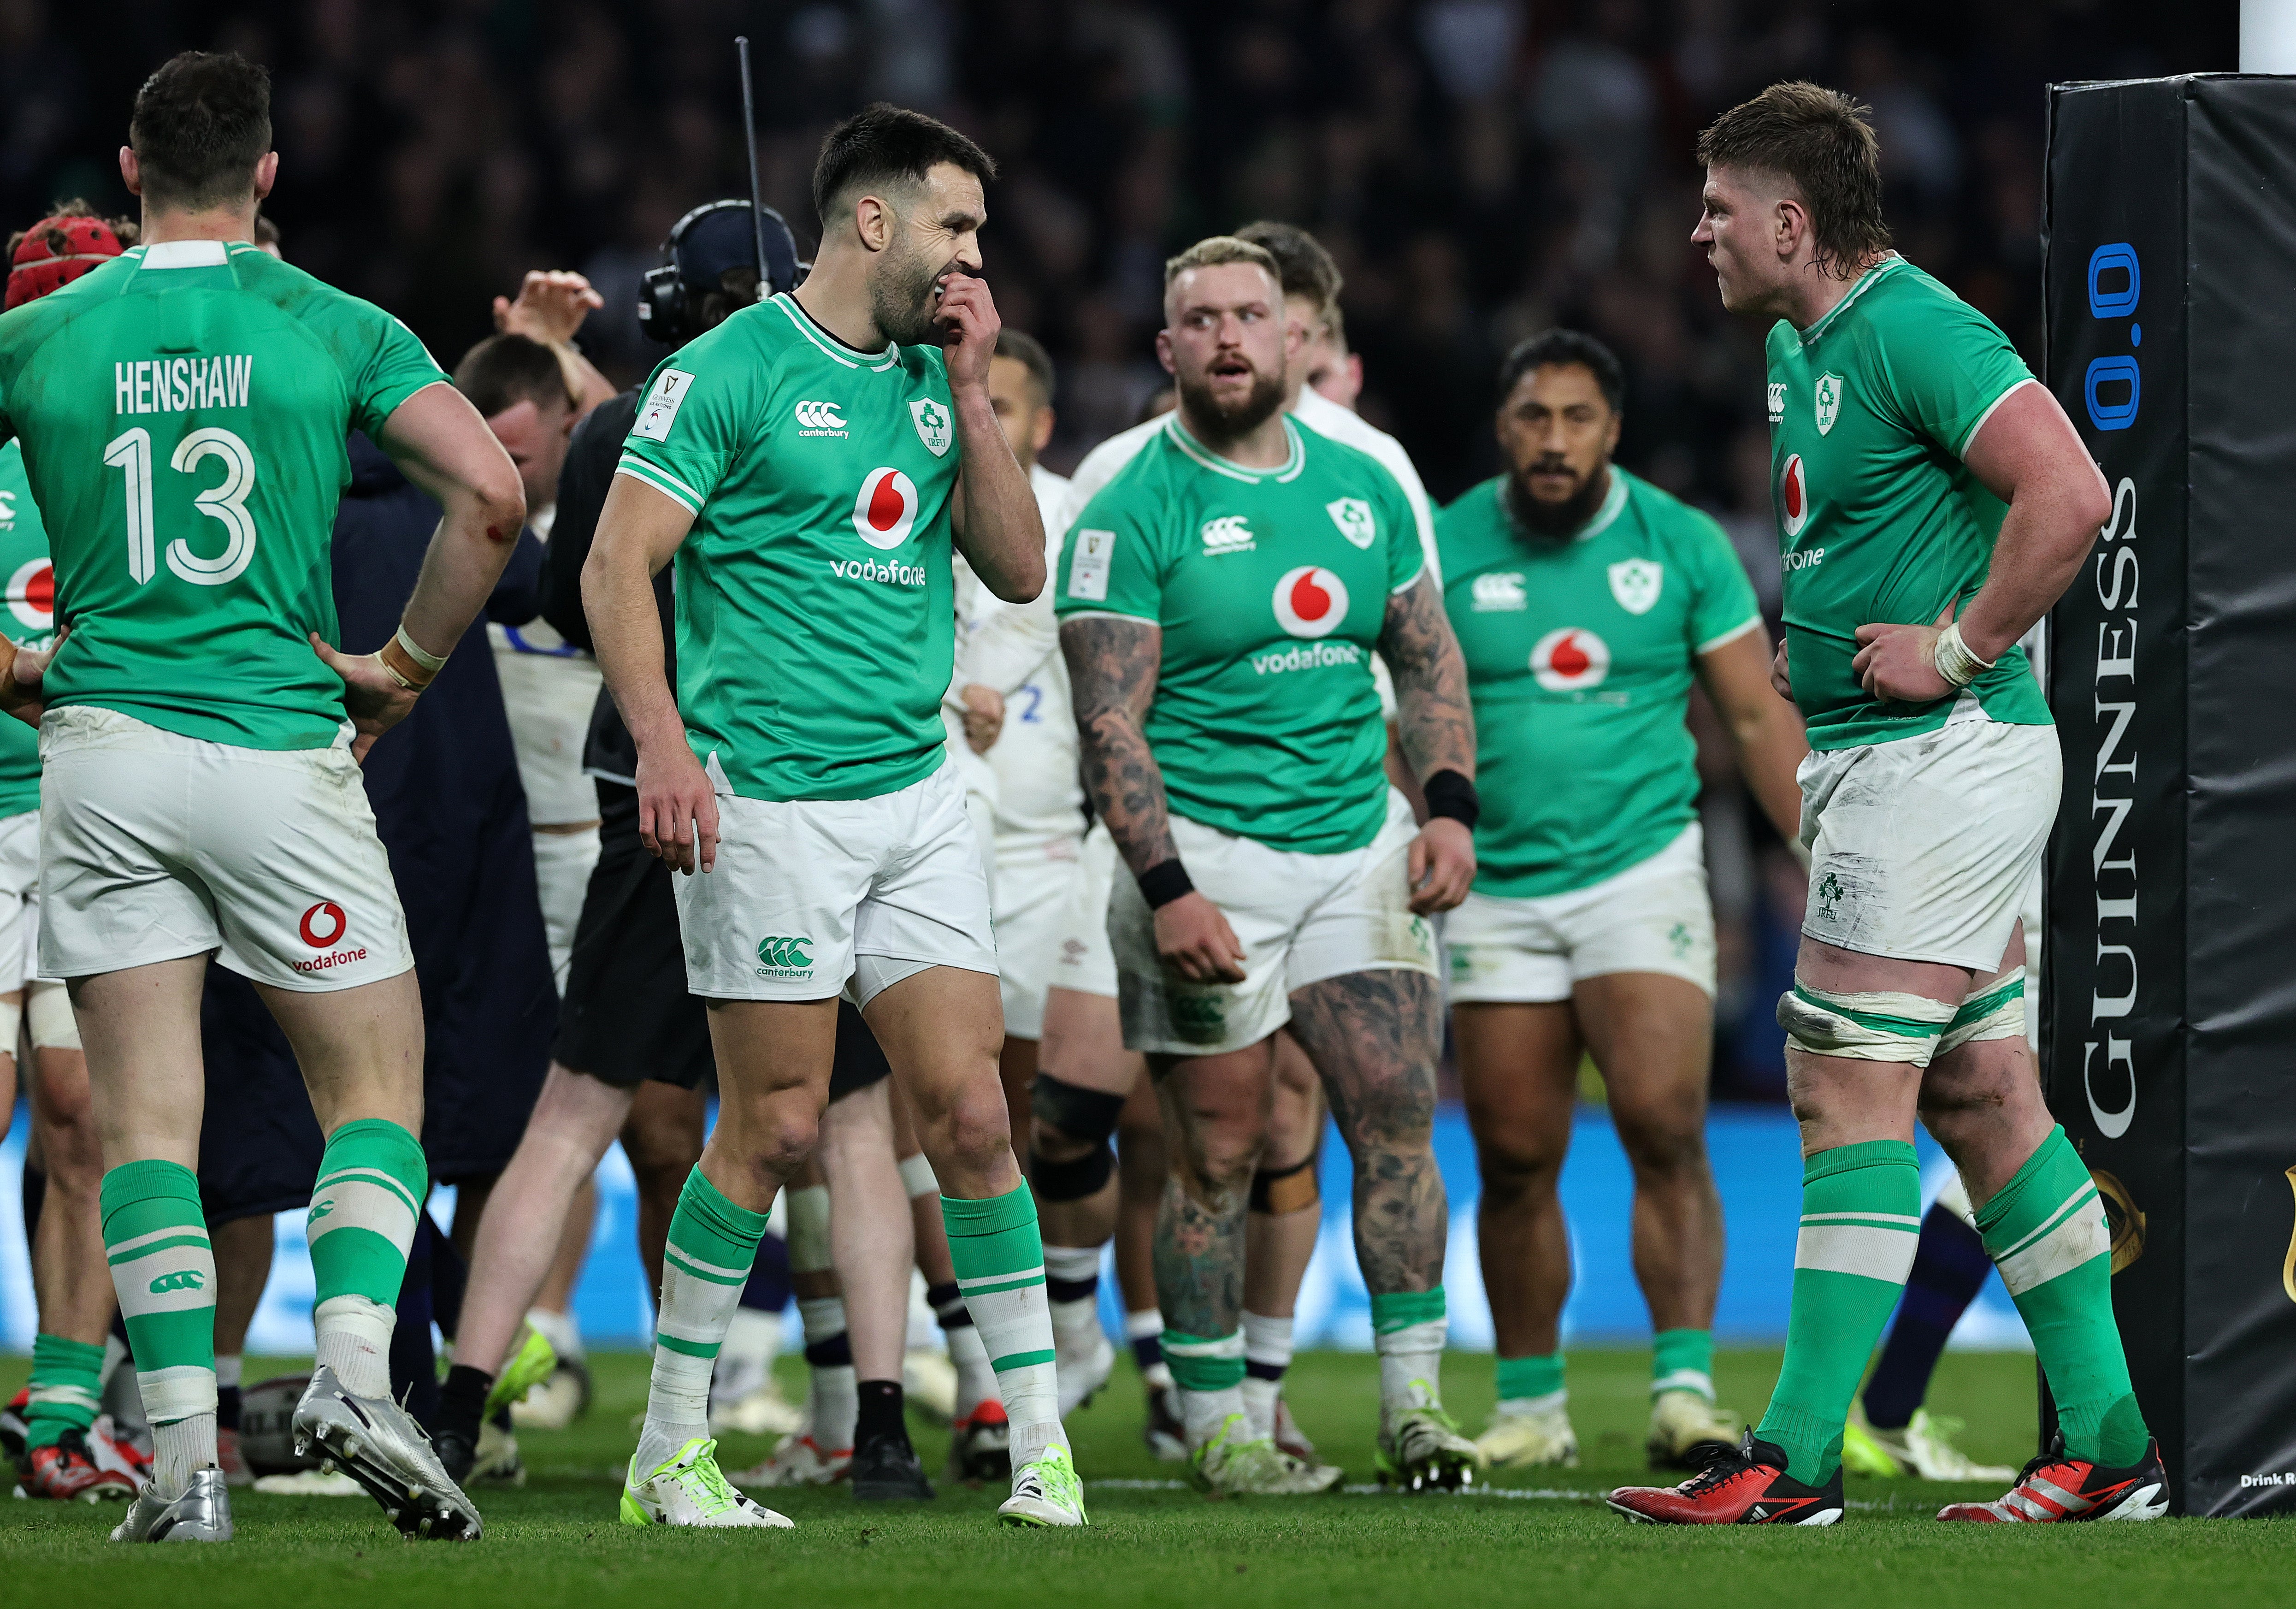 Ireland will aim to bounce back from defeat to England